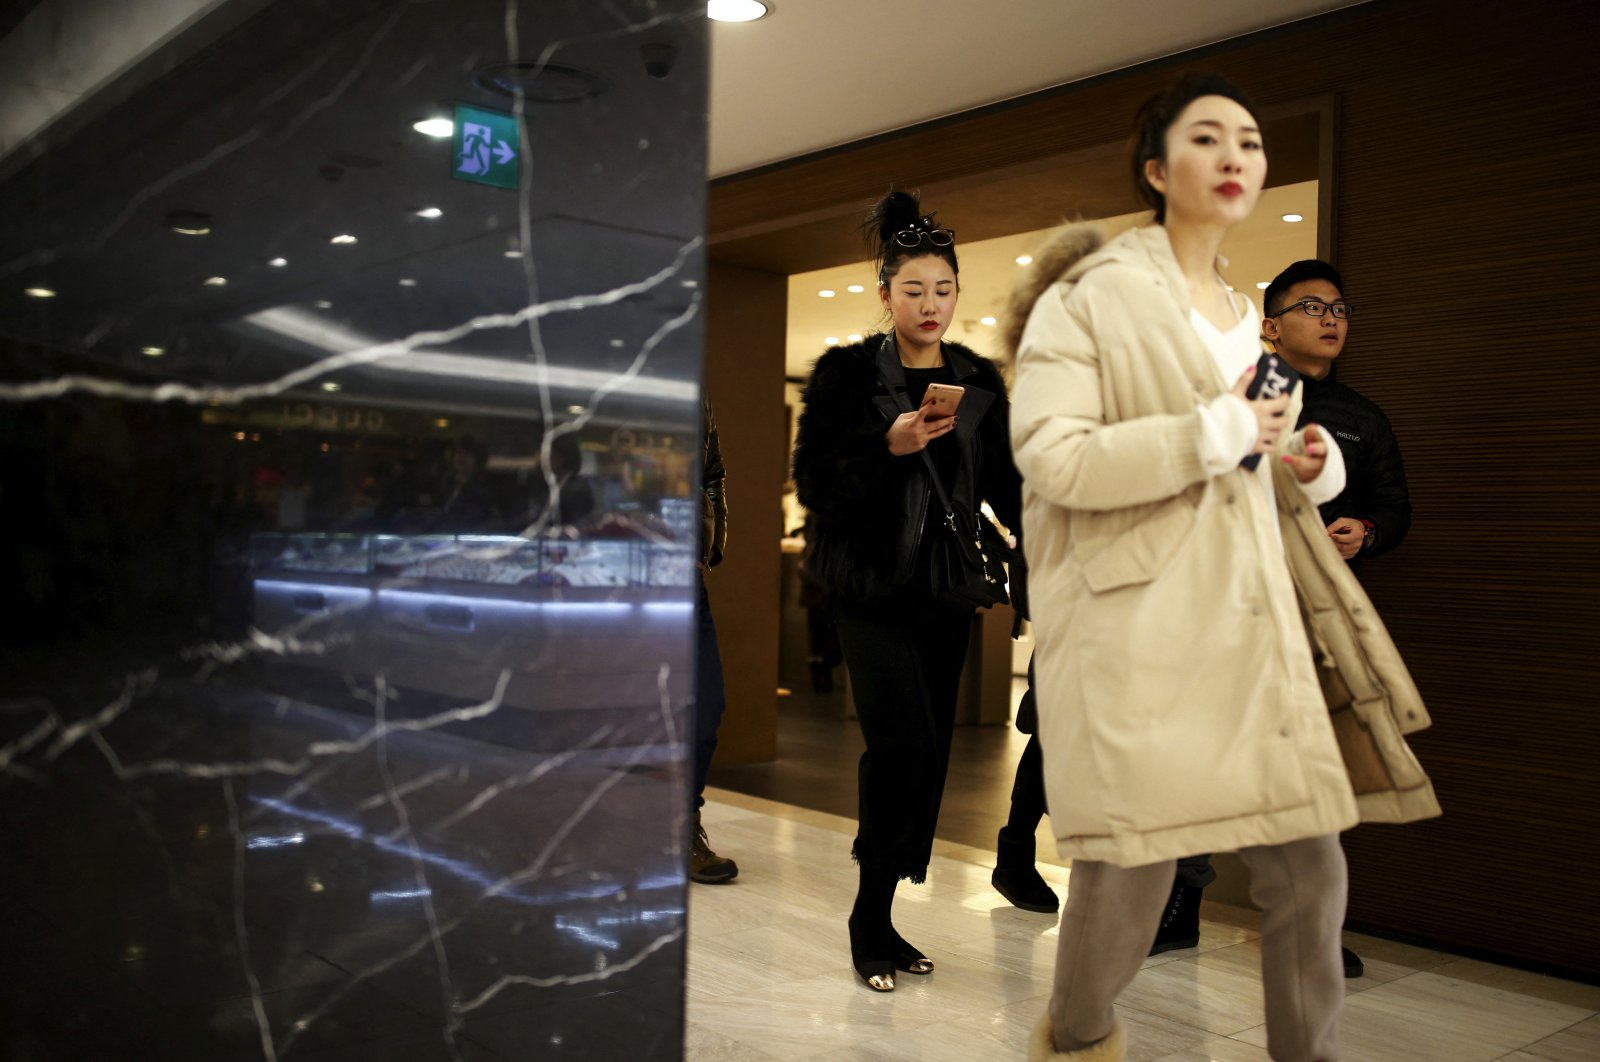 Chinese tourists shop at a Lotte duty-free shop in central Seoul, South Korea, Feb. 2, 2016. (Reuters File Photo)